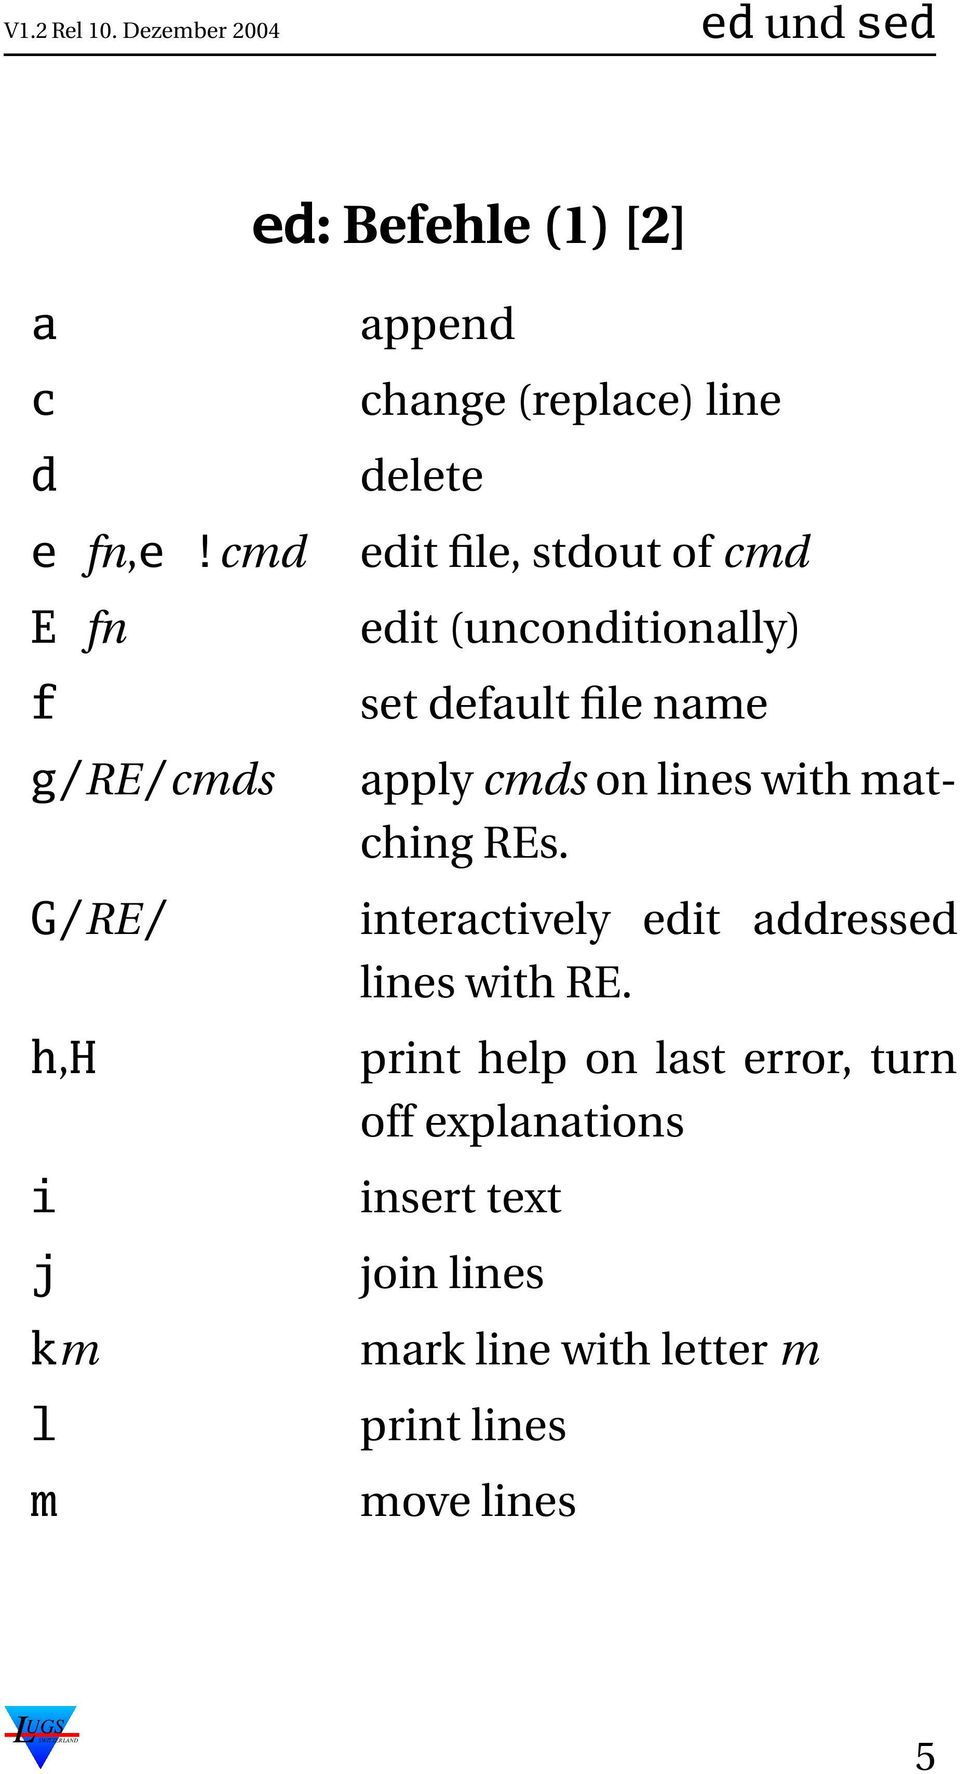 of cmd edit (unconditionally) set default file name apply cmds on lines with matching REs.